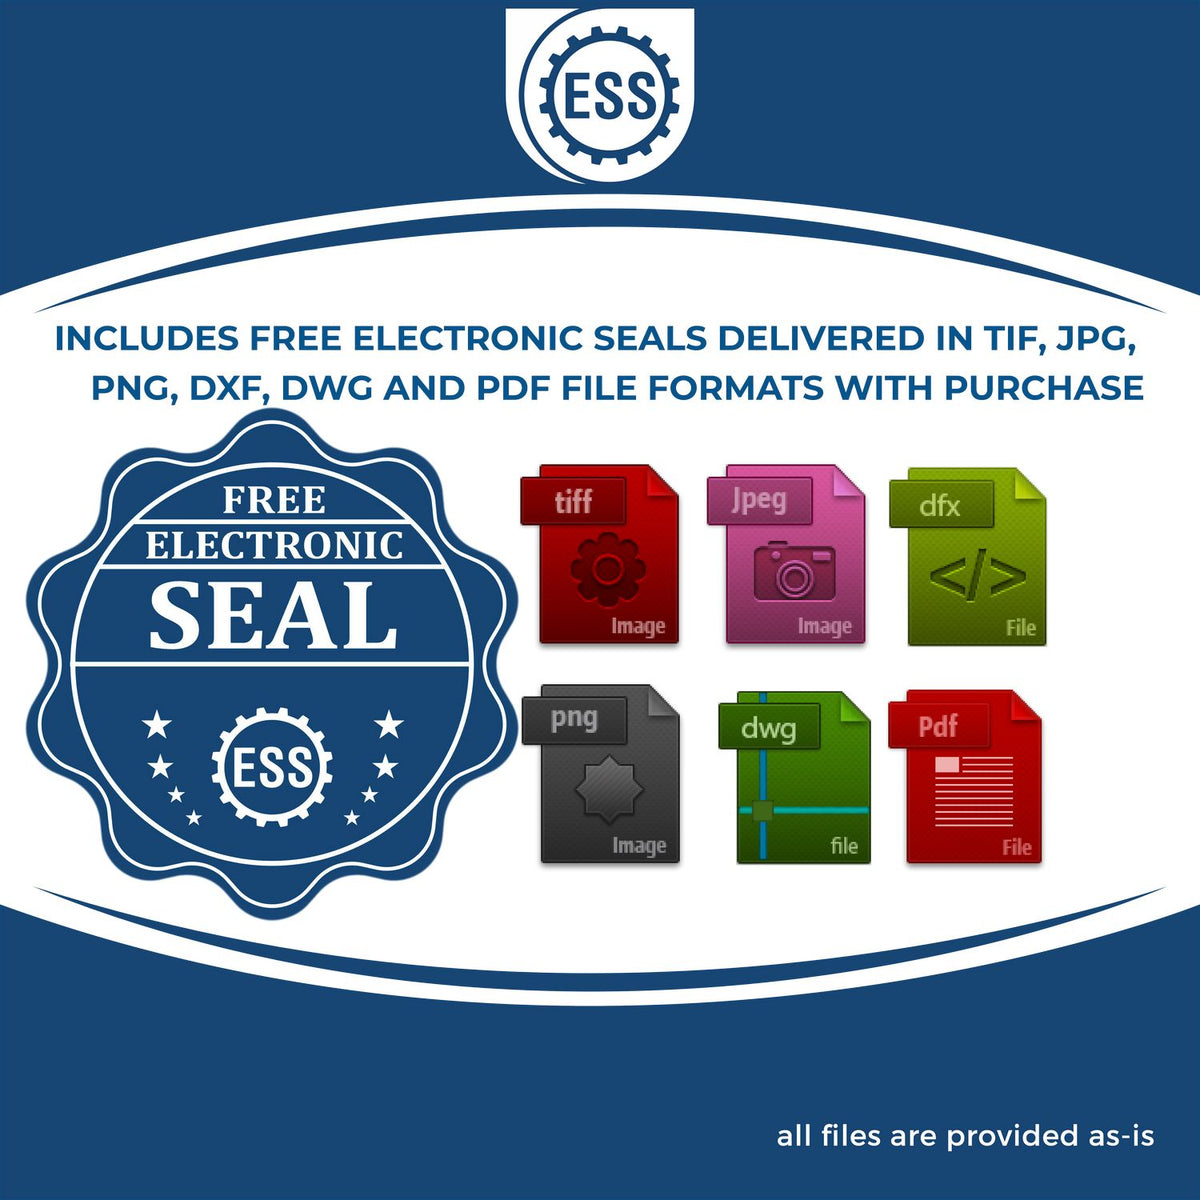 An infographic for the free electronic seal for the State of Connecticut Extended Long Reach Geologist Seal illustrating the different file type icons such as DXF, DWG, TIF, JPG and PNG.